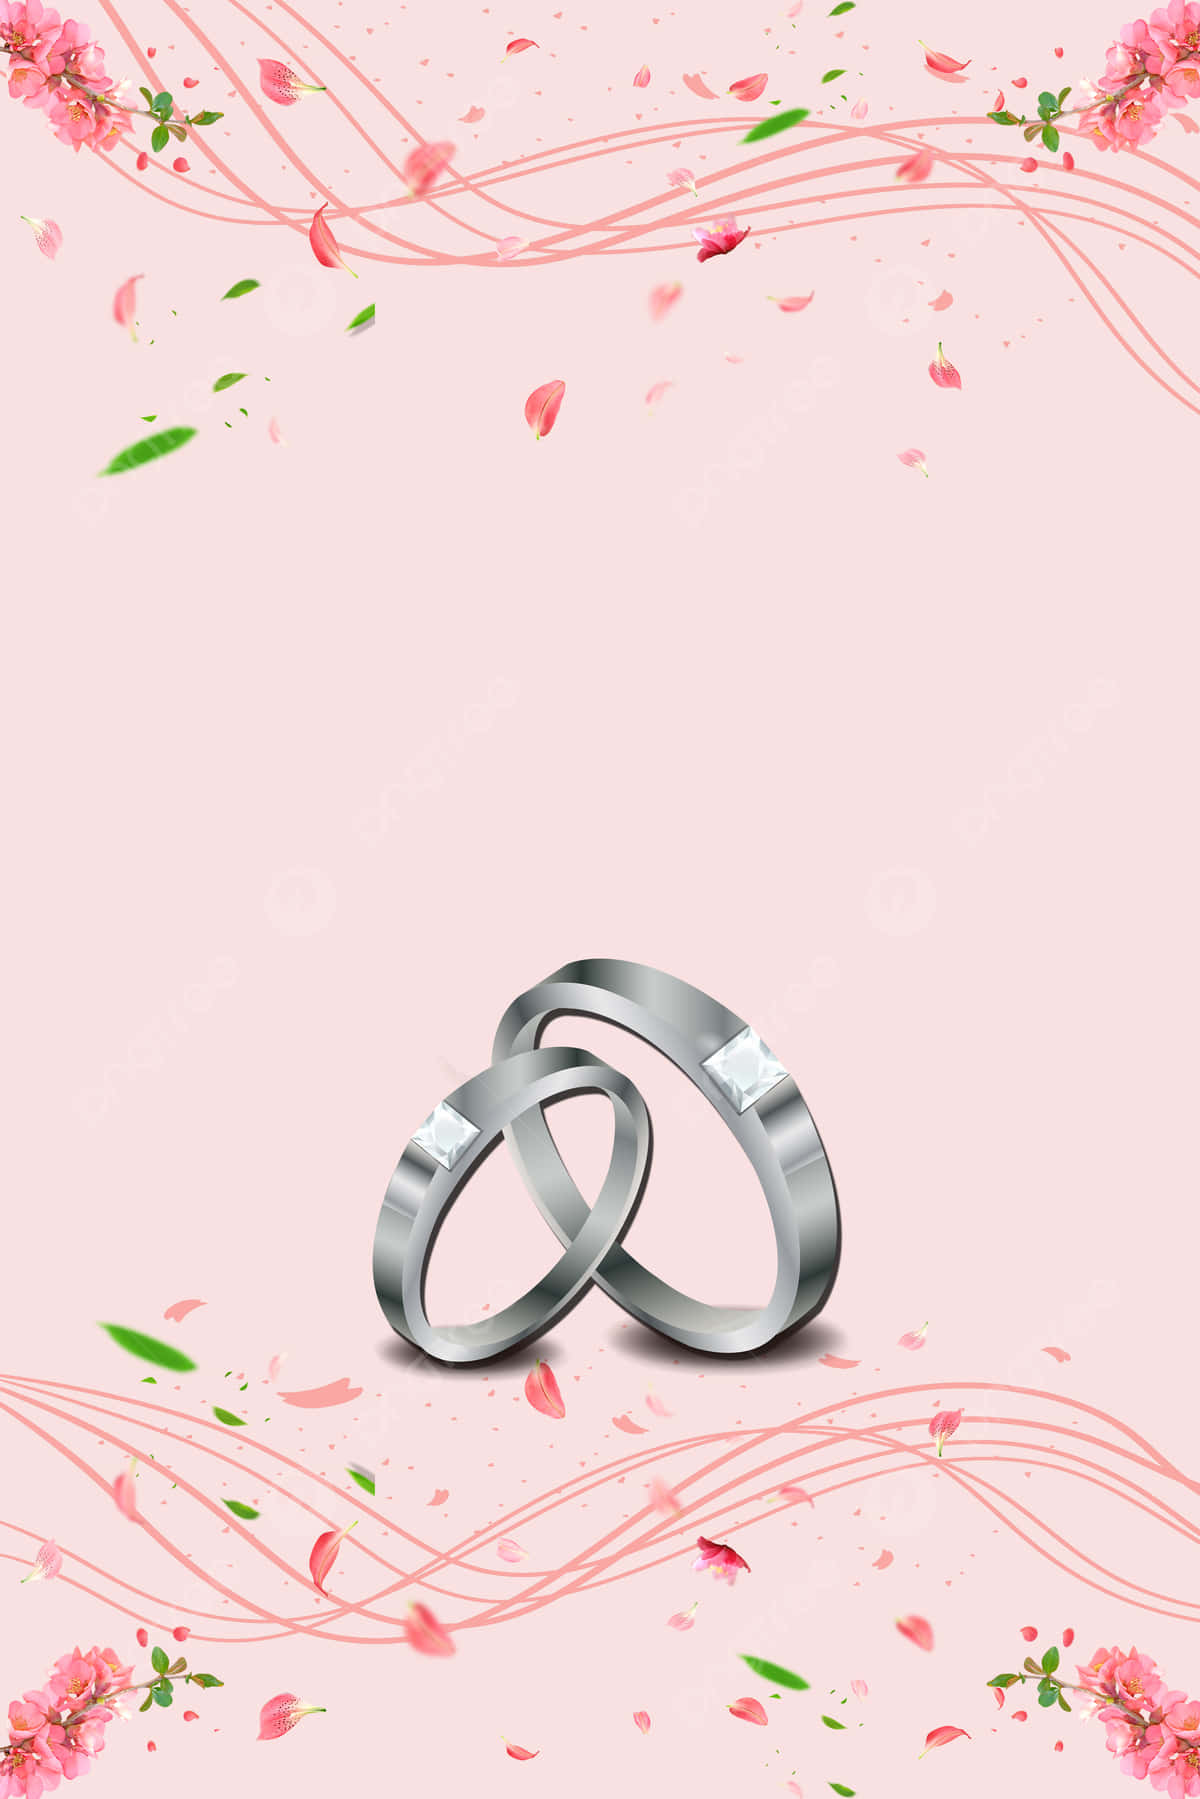 Wedding Rings On Pink Background With Flowers